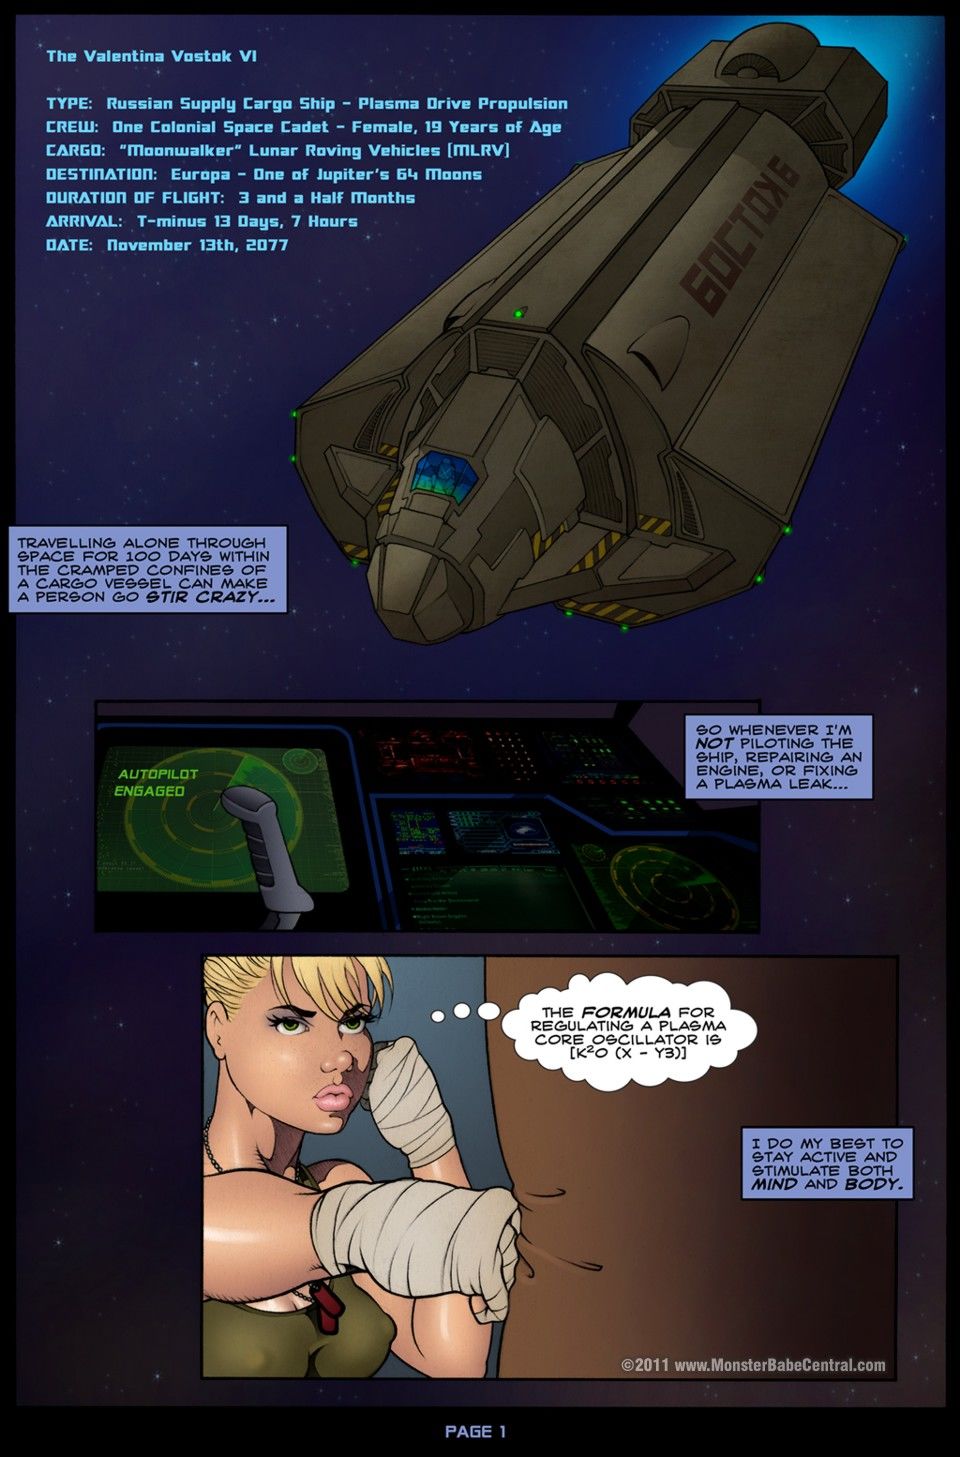 Europa page 2